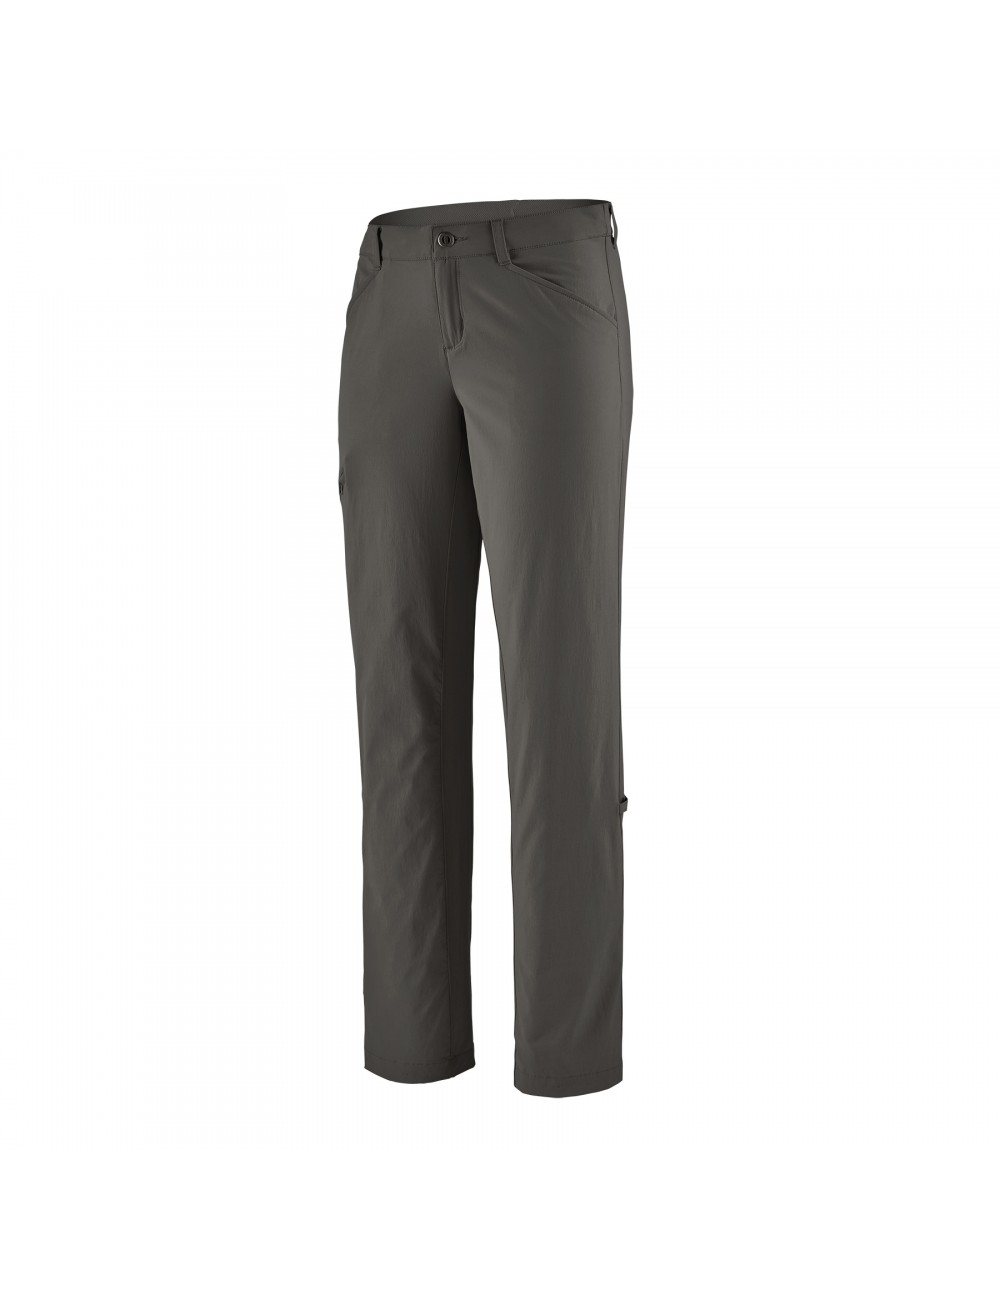 Patagonia Wms Quandary Pants - Forge Grey